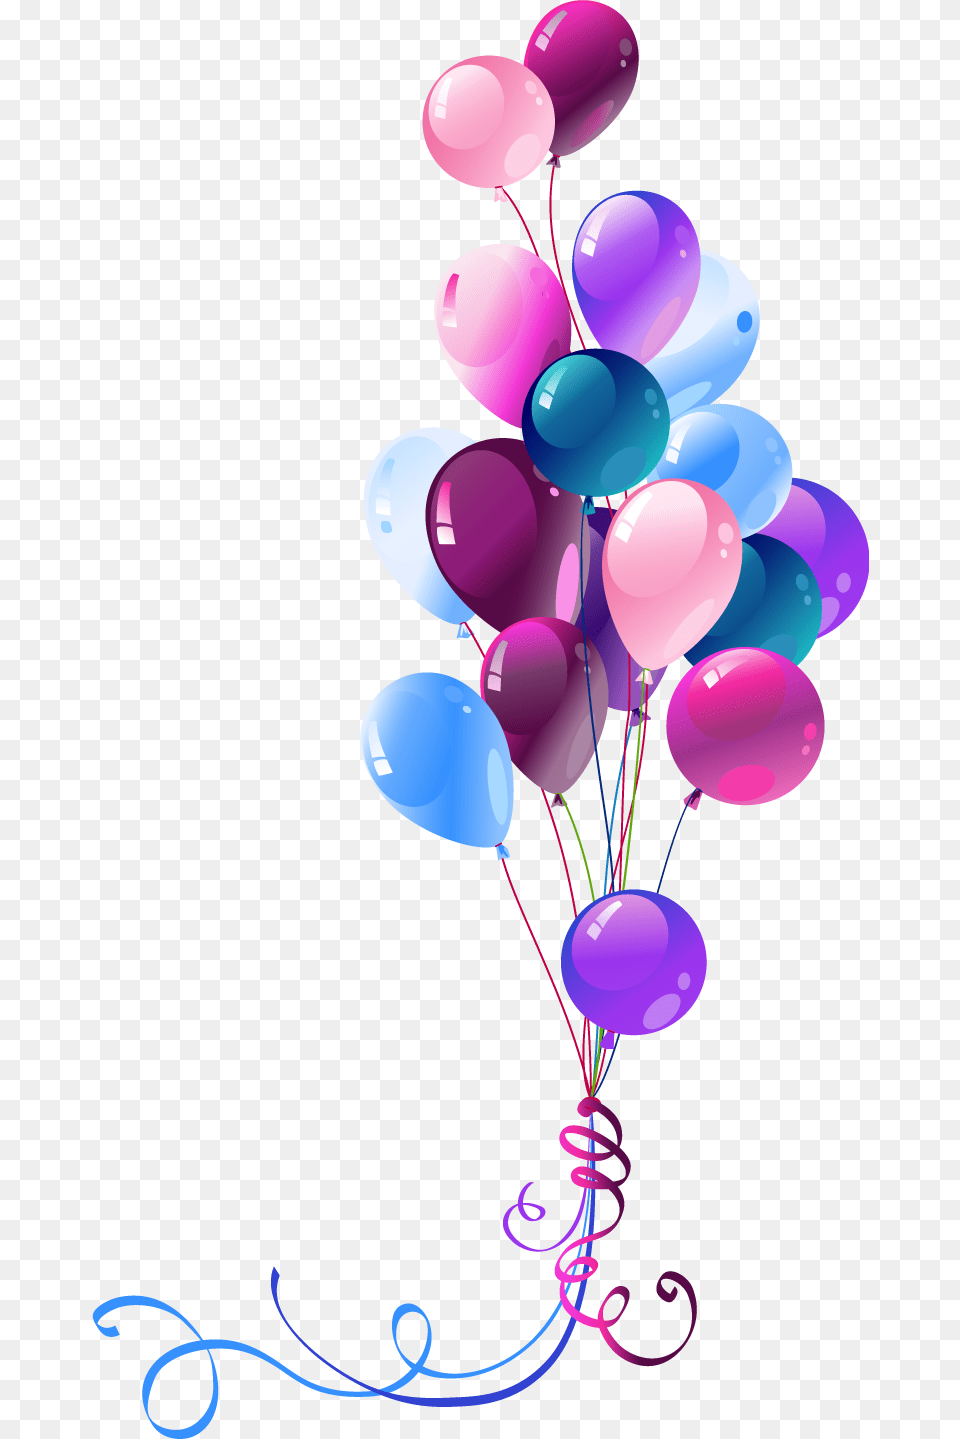 A Graphic Design Company Happy Birthday Balloon Png